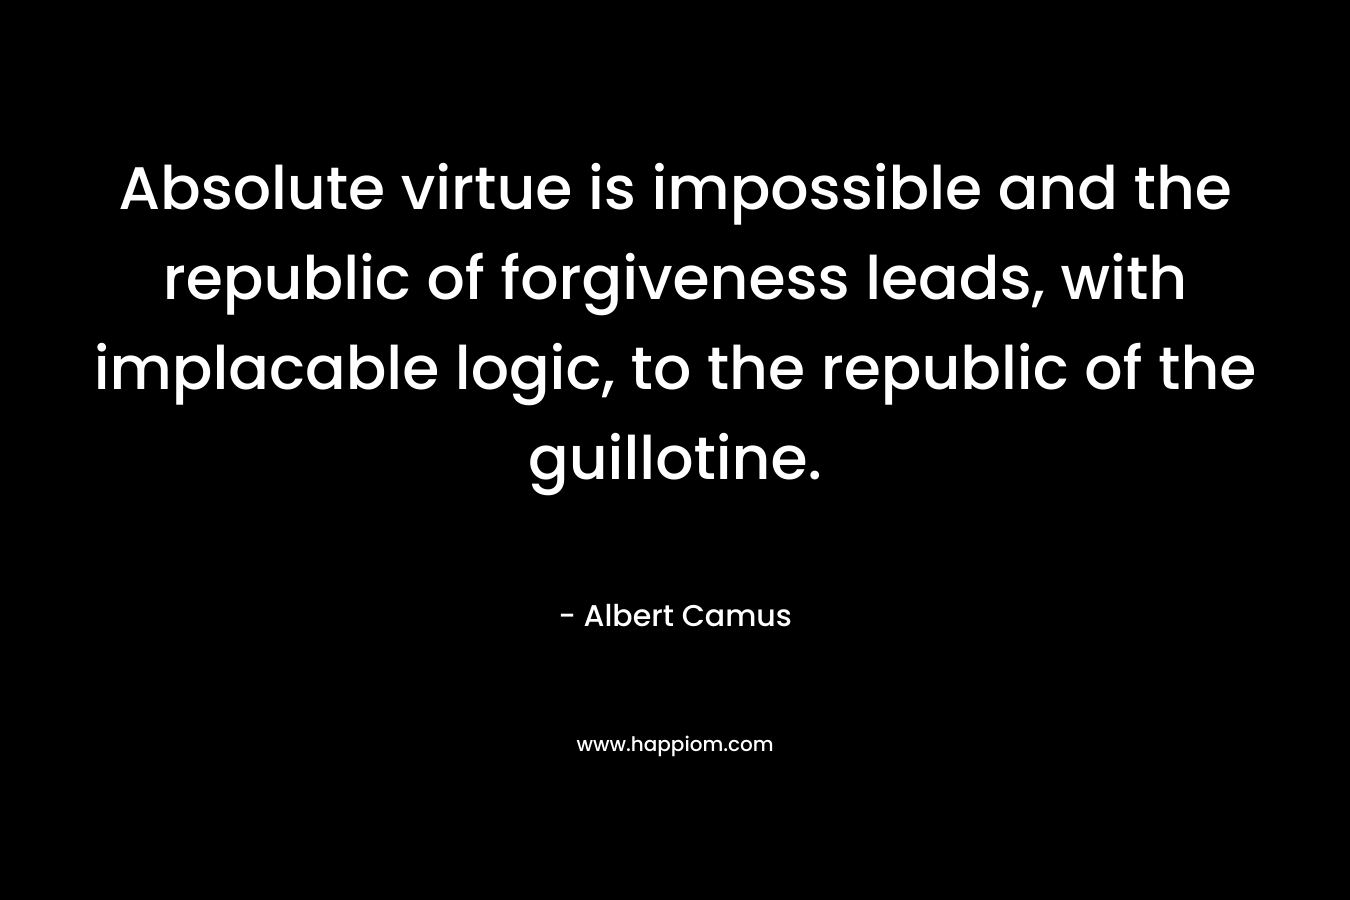 Absolute virtue is impossible and the republic of forgiveness leads, with implacable logic, to the republic of the guillotine. – Albert Camus